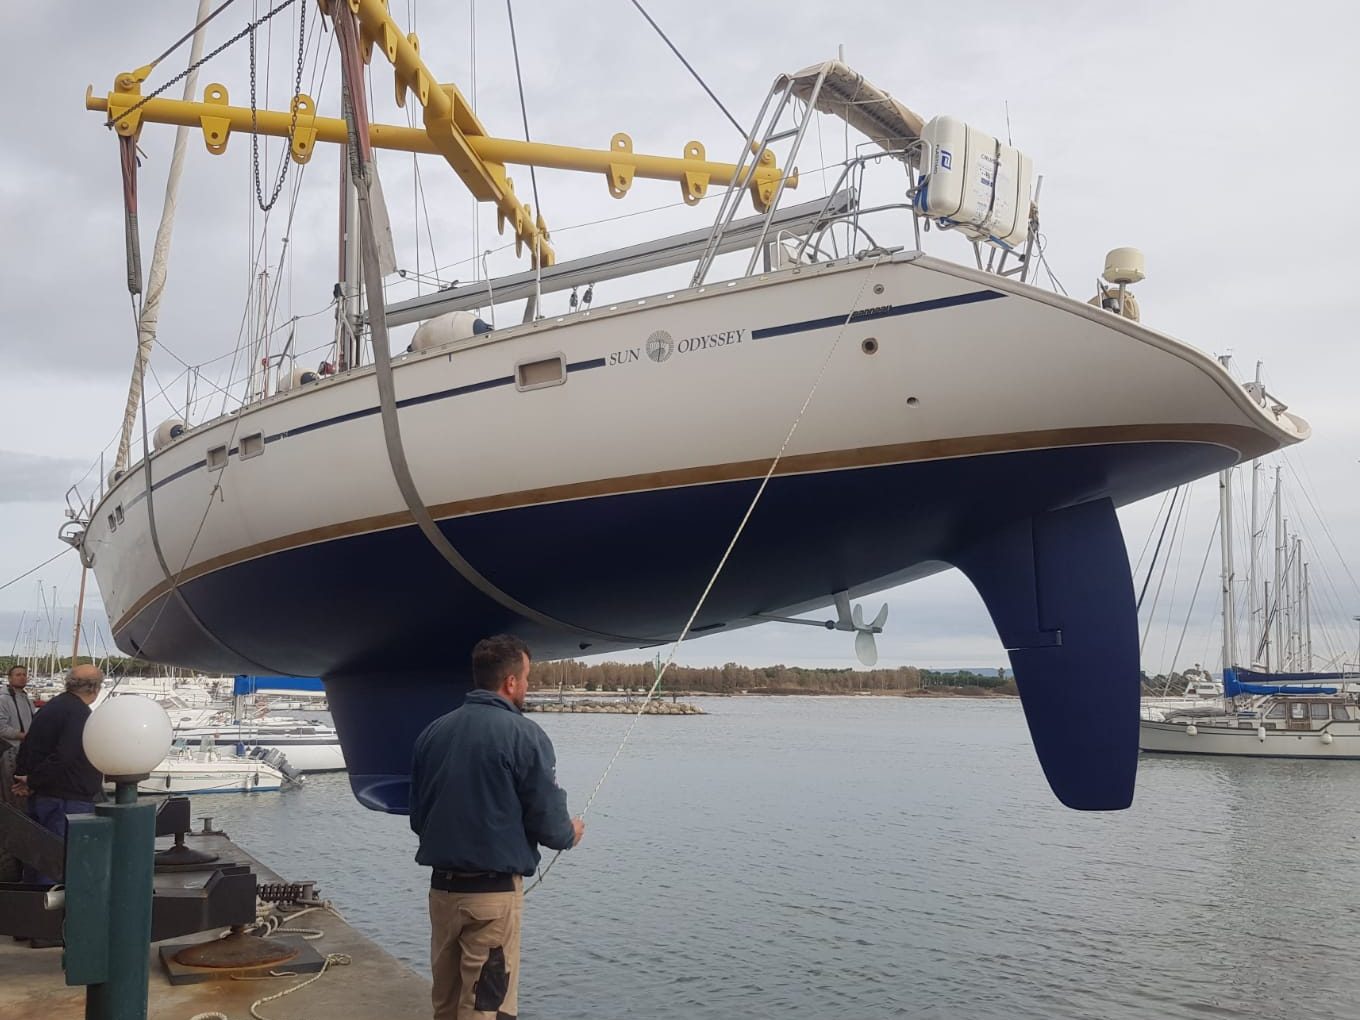 sun odyssey sailboat being launched after renovation